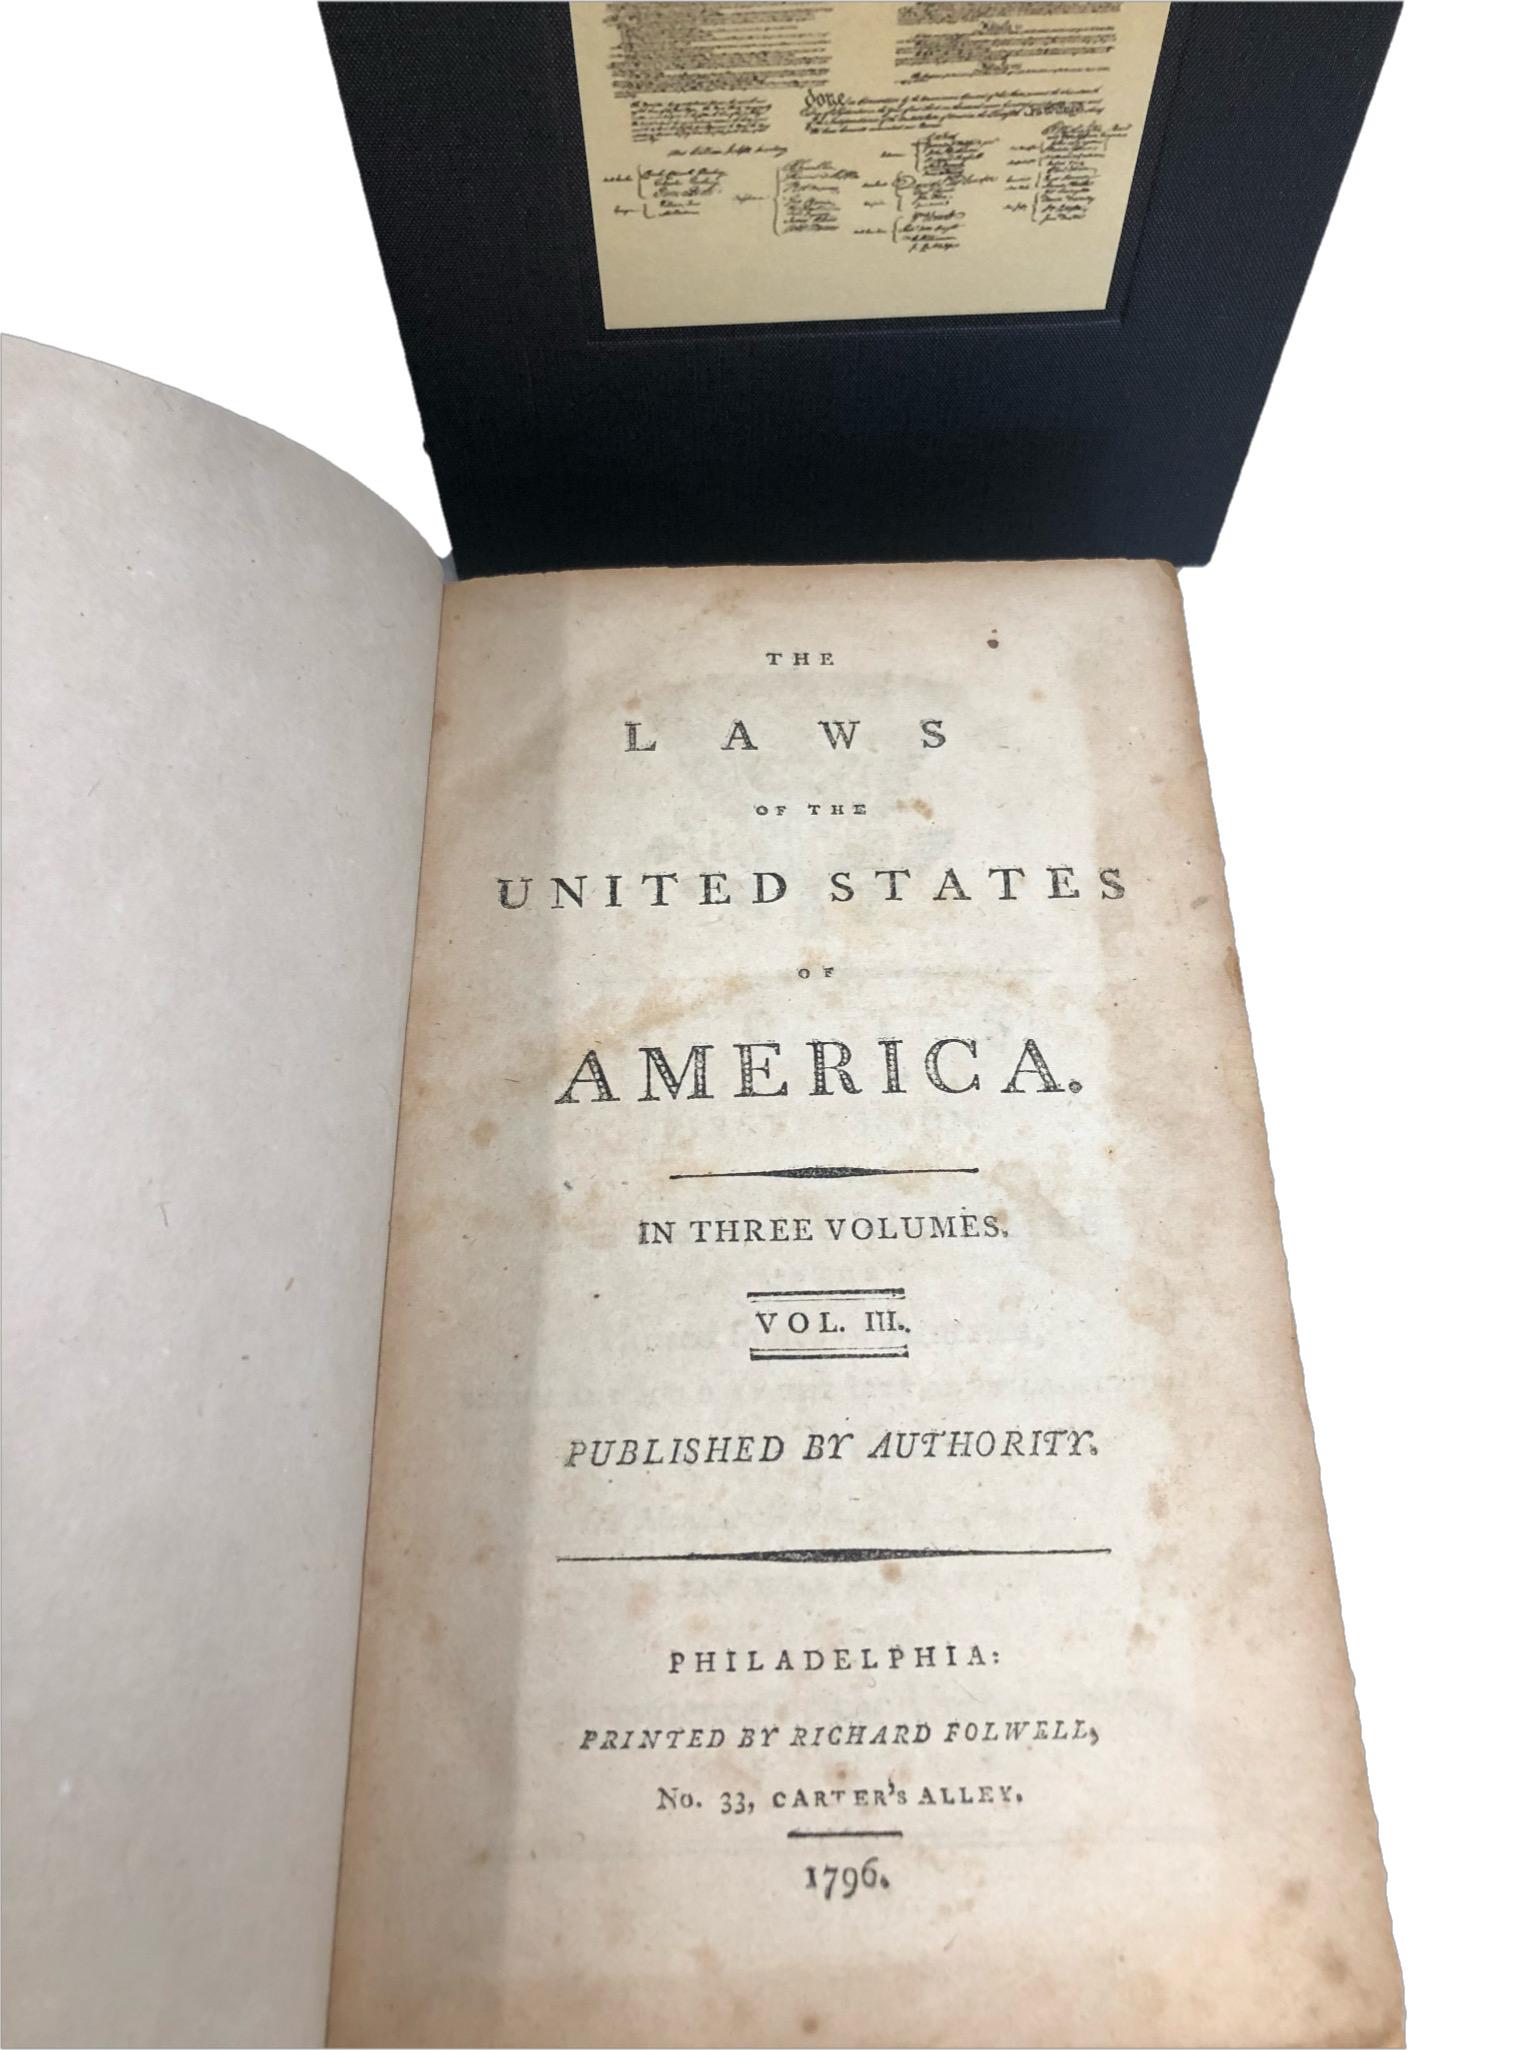 The Laws of the United States of America, First Edition, 3 Vol. Set, 1796-7 3